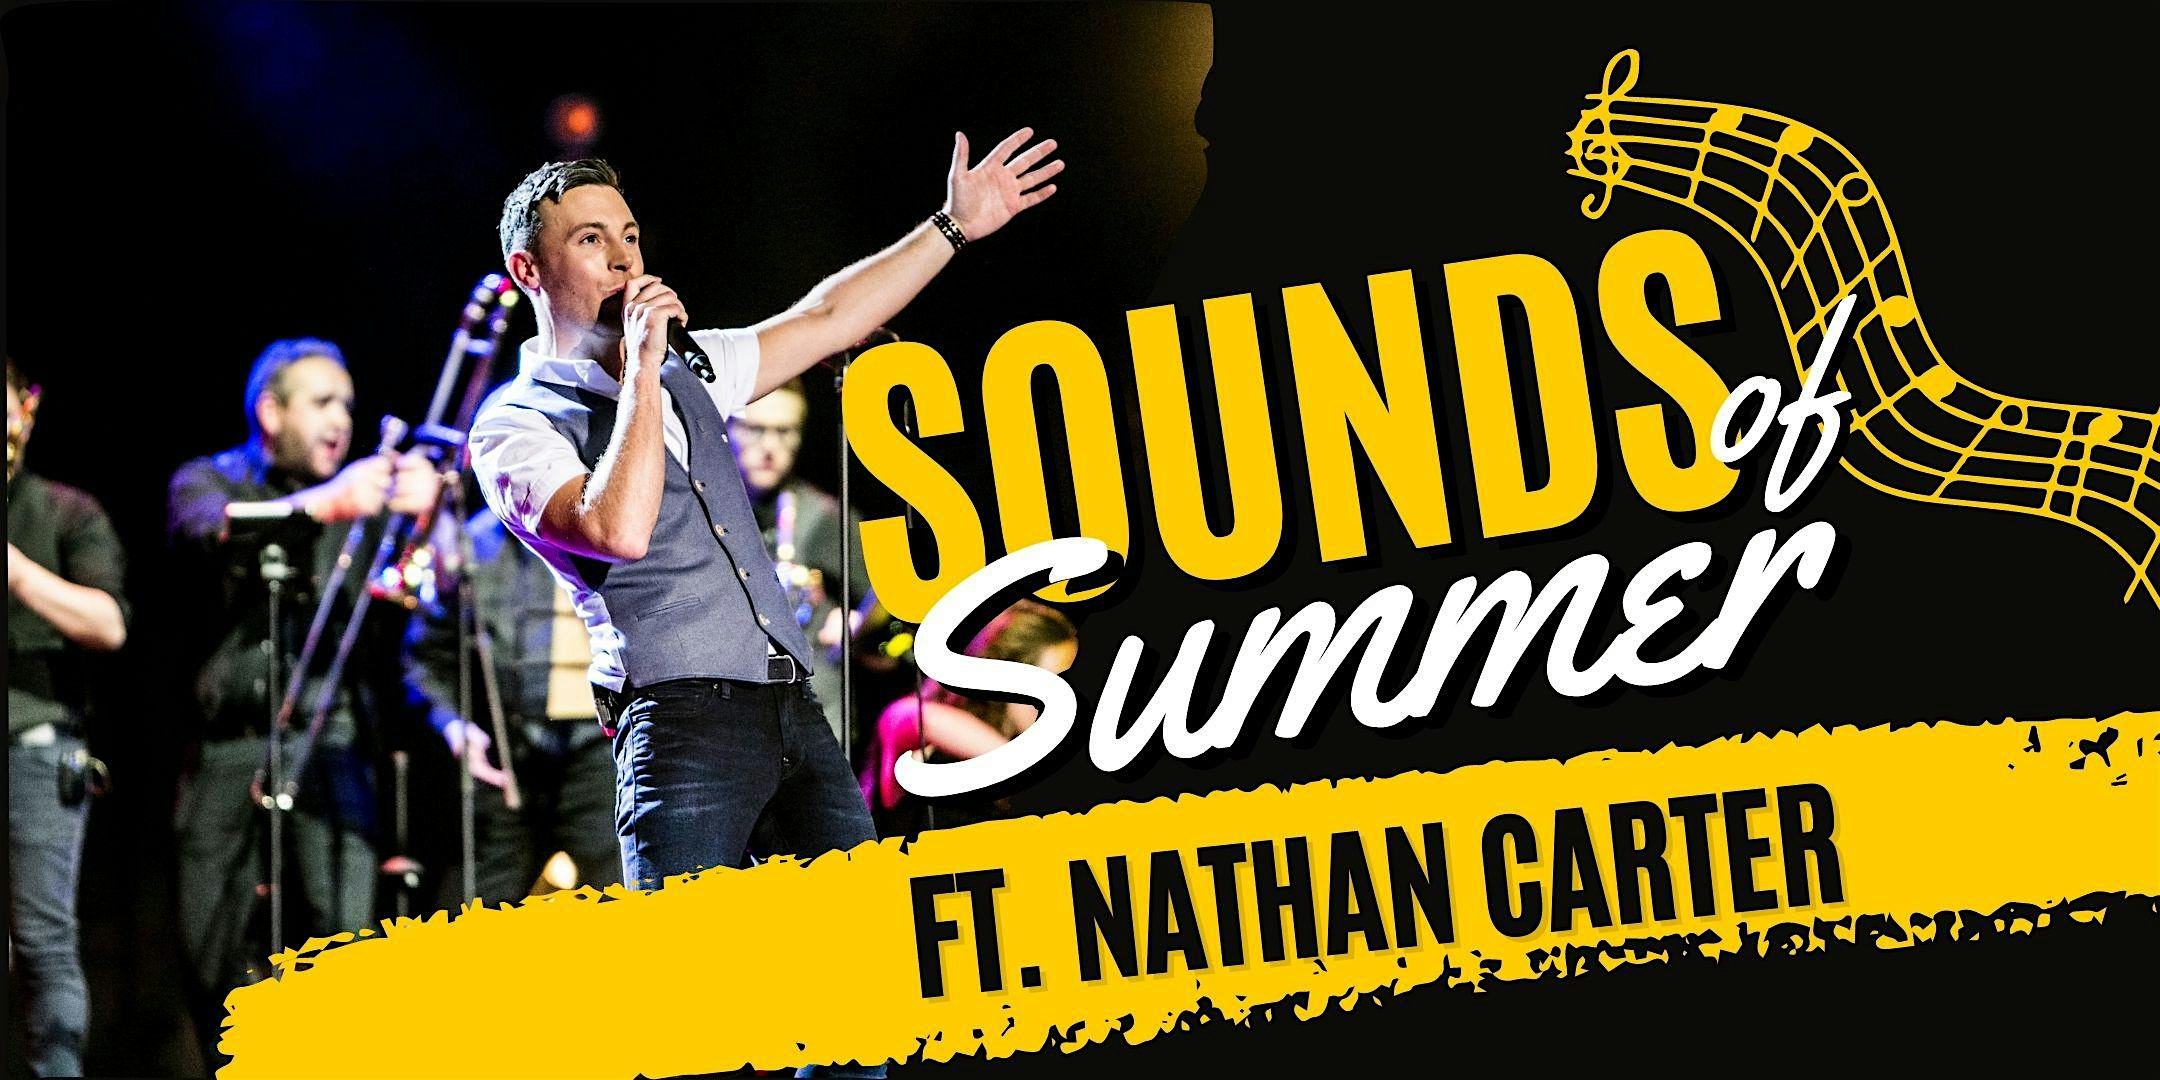 ‘Sounds of Summer’ featuring Nathan Carter, The Brave Collide & Friends!